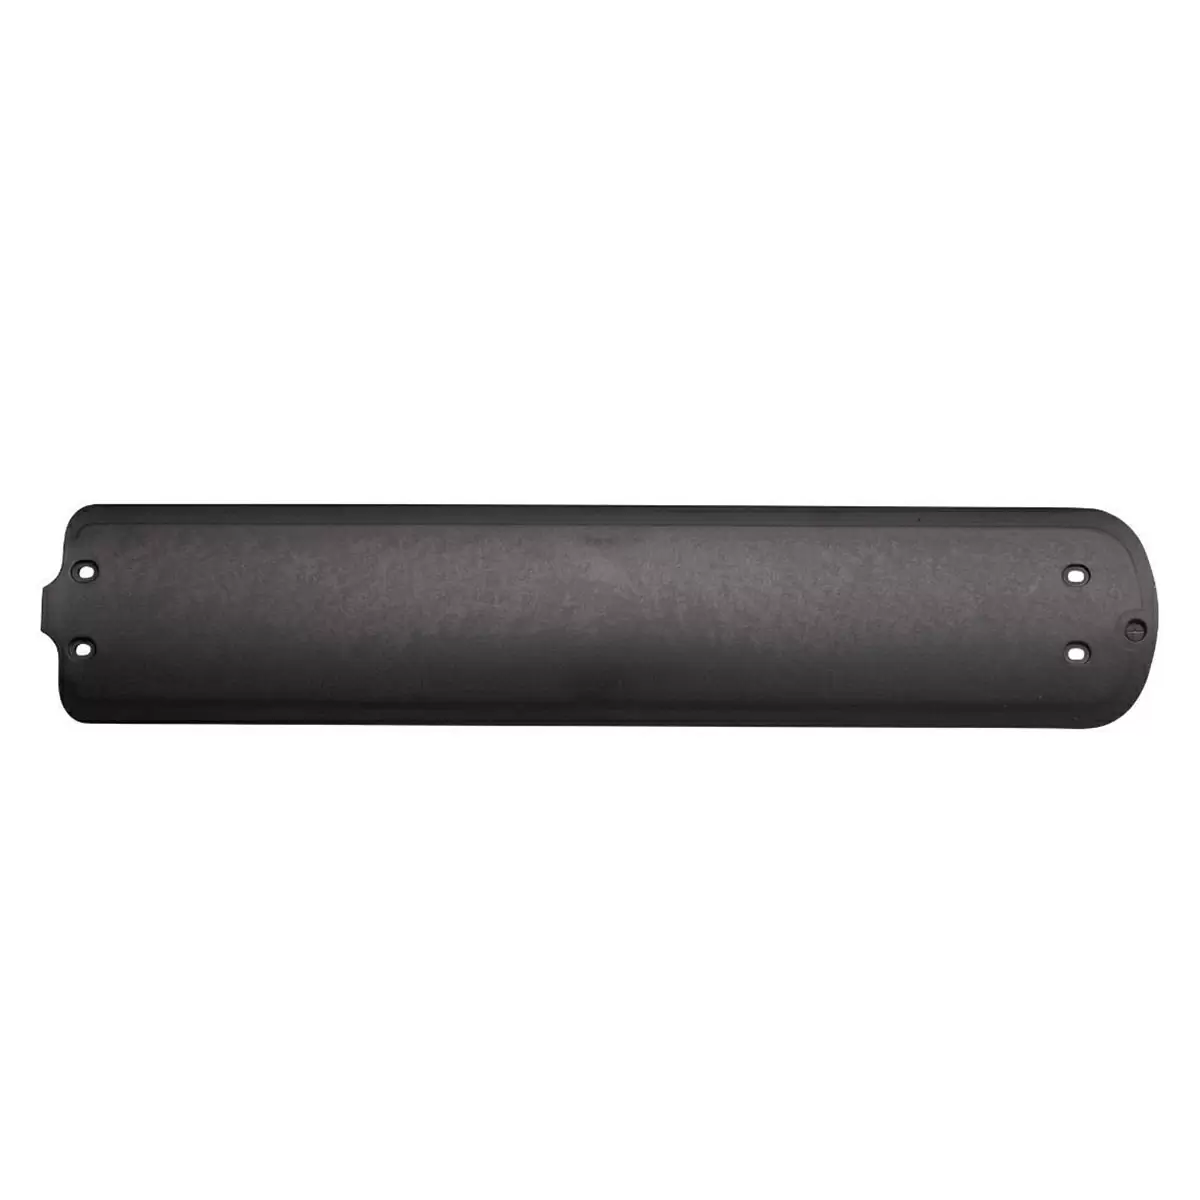 Bullit 630wh battery cover - image